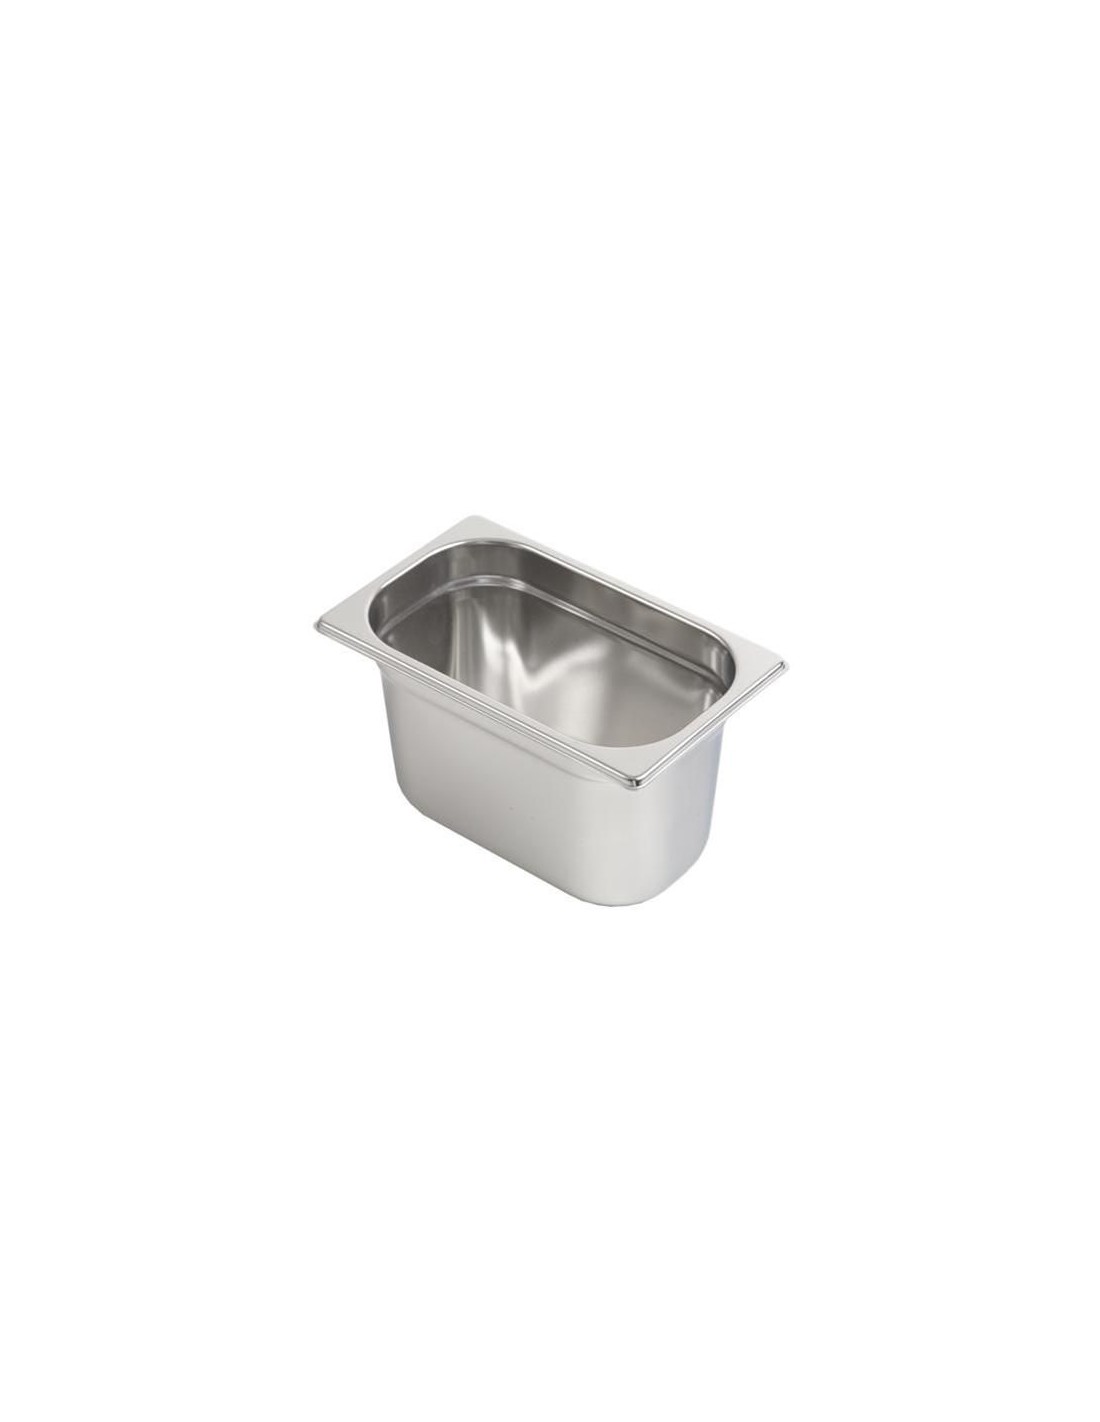 Gastronorm container GN 1/3 (32.5 x 17.5 cm) height 15 cm